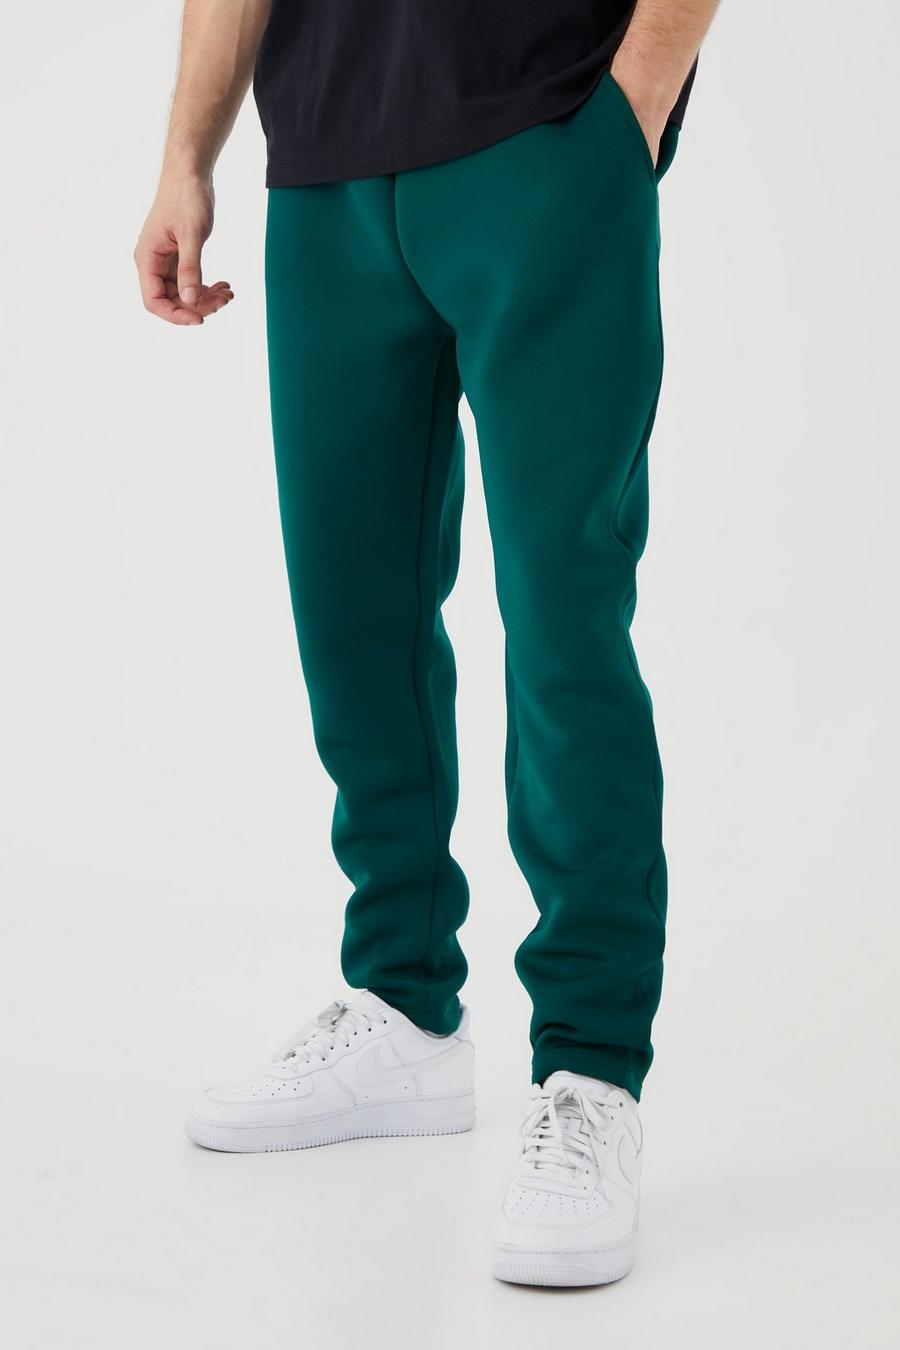 Forest Tall Slim Tapered Cropped Bonded Scuba Sweatpant